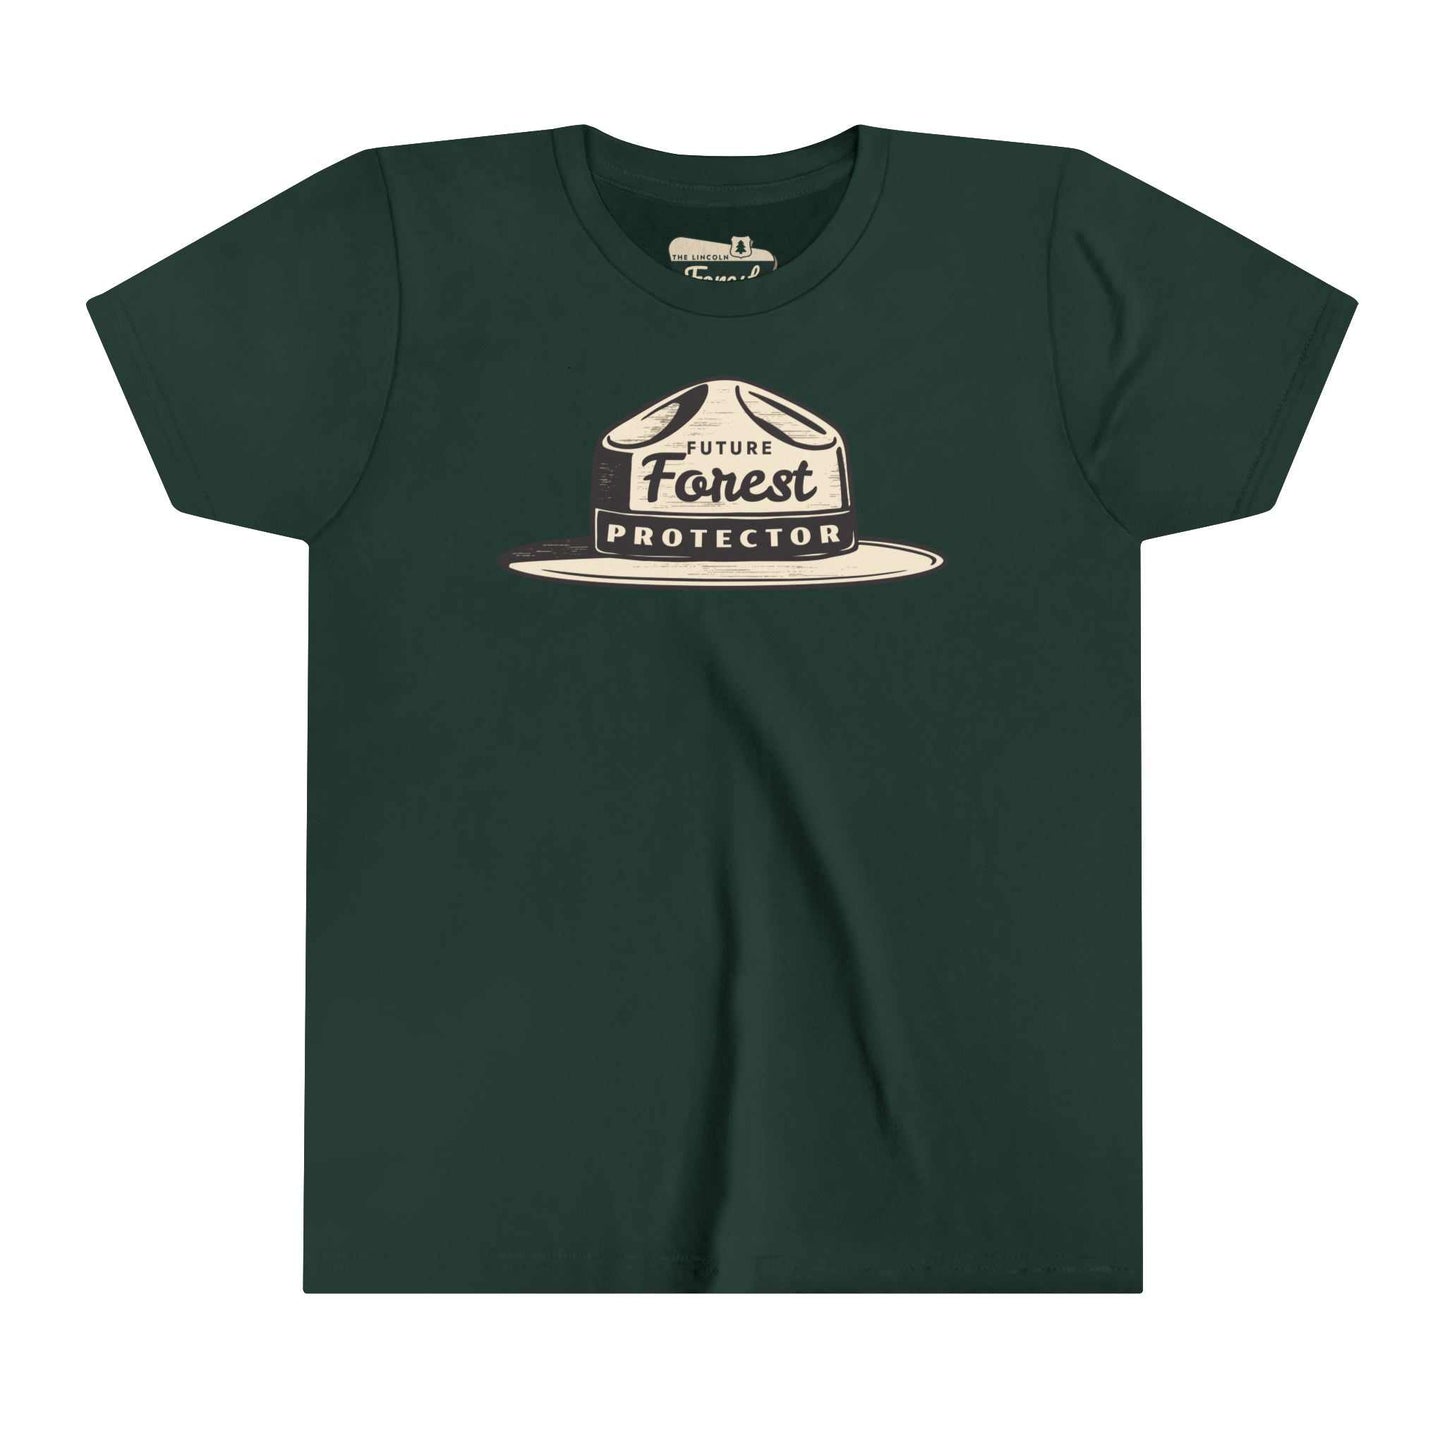 Future Forest Ranger Youth ShirtInspire those youngins to get outside and become stewards of nature from day one! 
- jersey cotton- soft and lightweight
The Lincoln Forest cares deeply about the pl